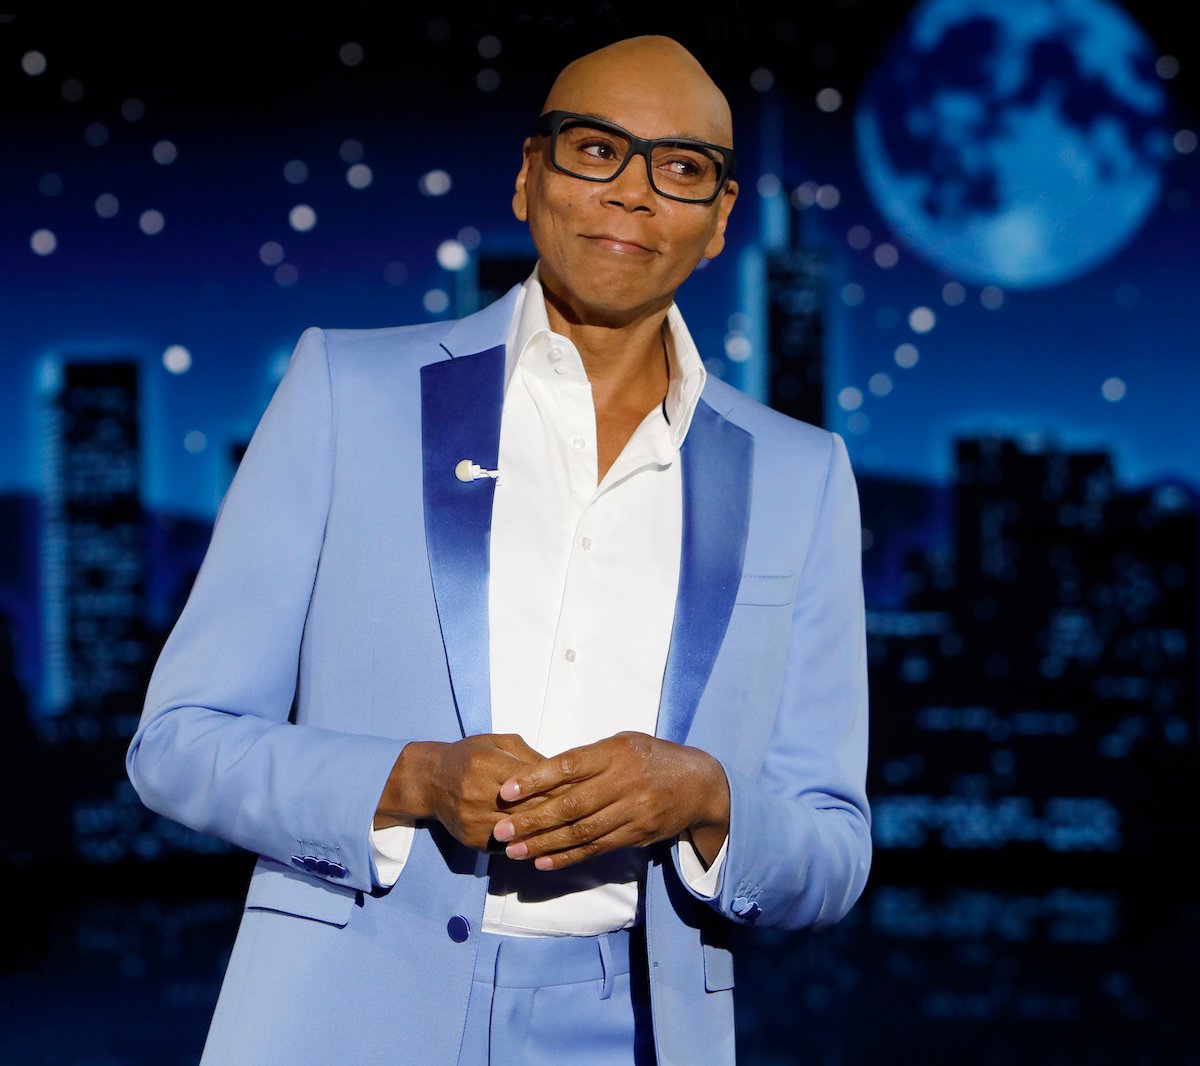 RuPaul smiling on stage wearing a blue suit at "Jimmy Kimmel Live!"